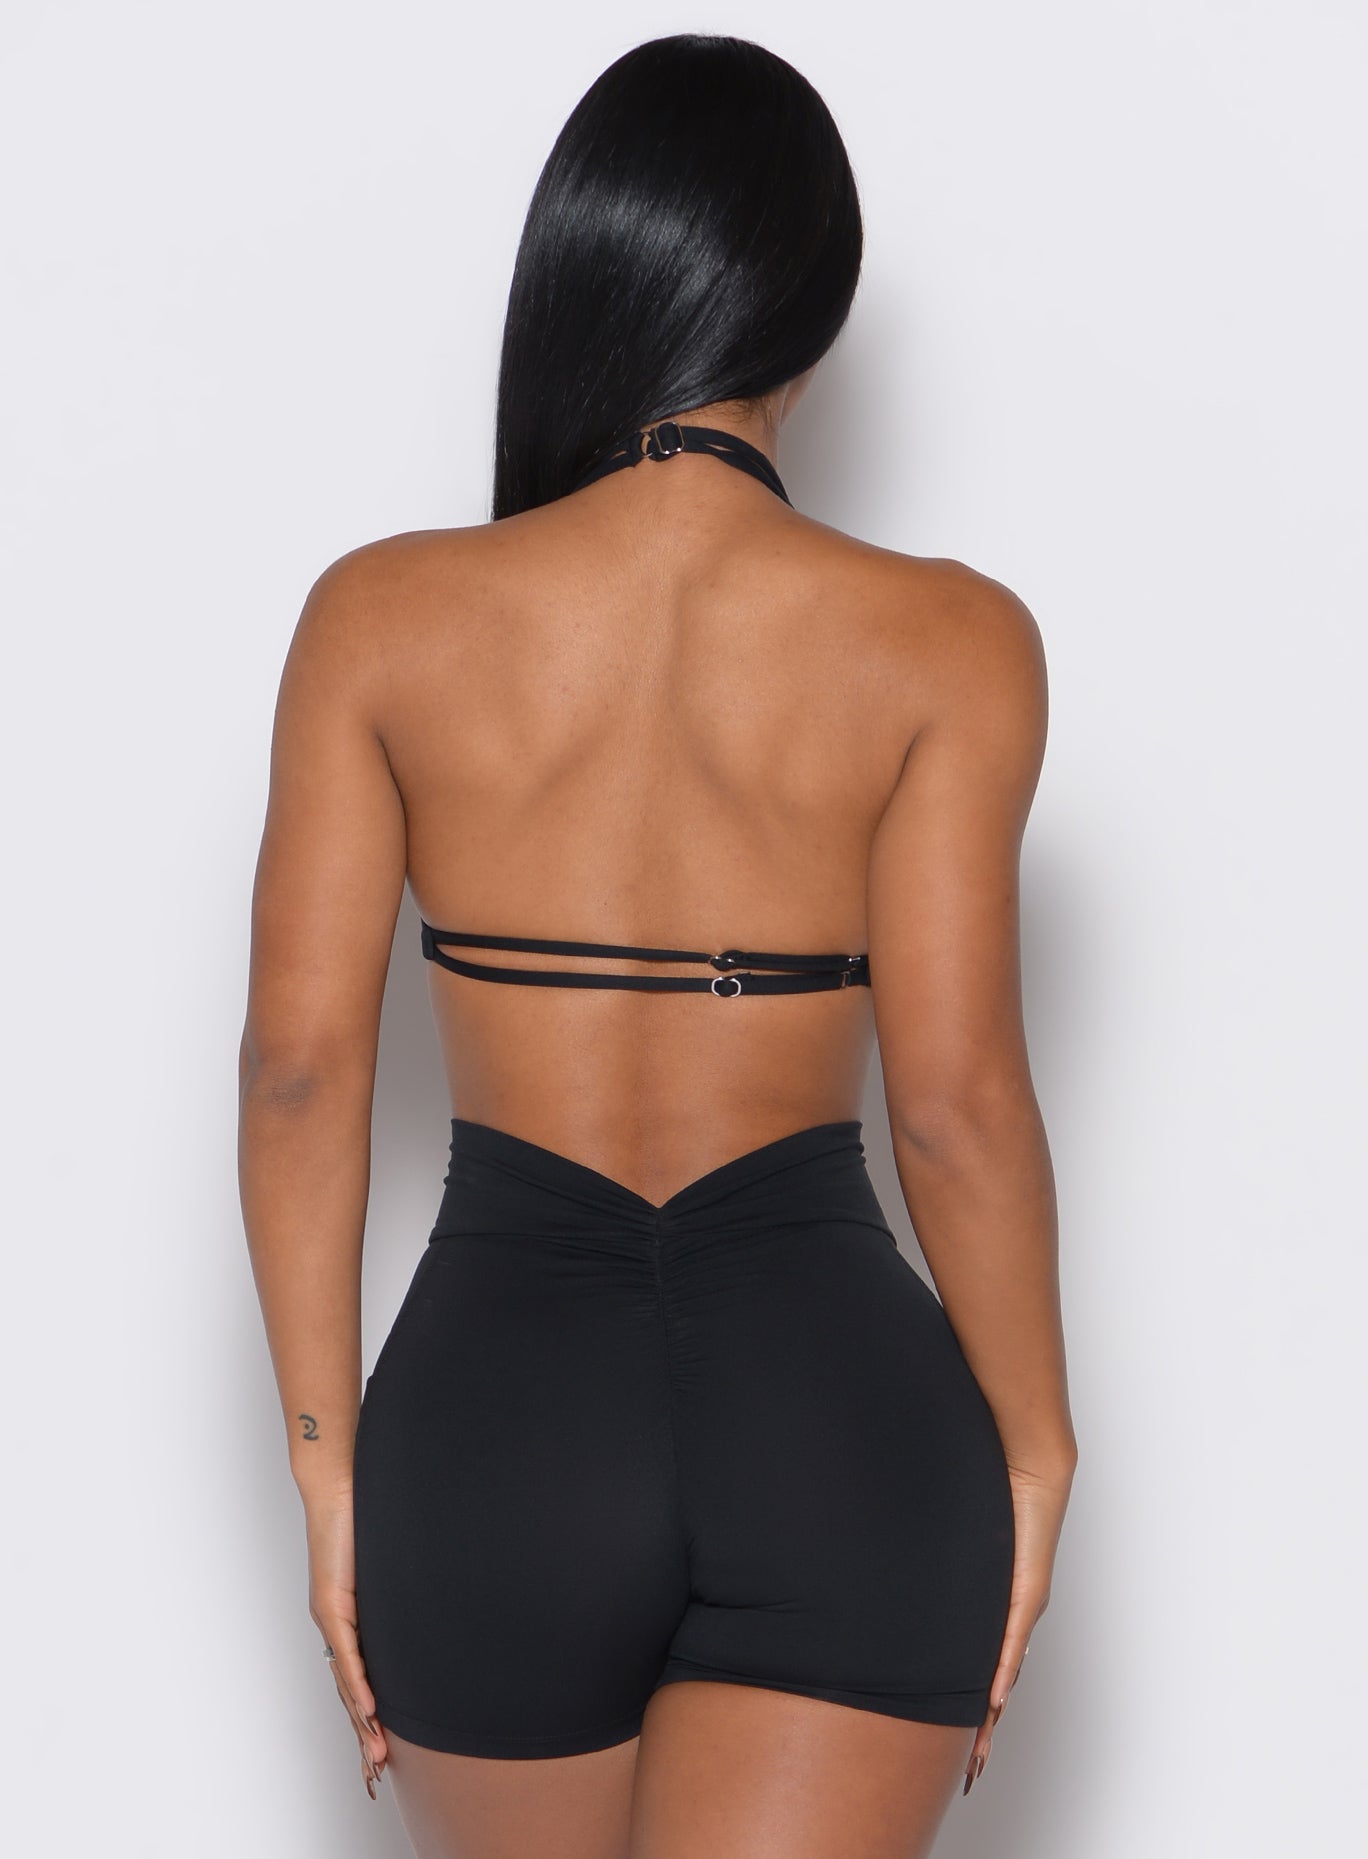 back profile view of a model wearing our black Butterfly Sports Bra along with a matching shorts